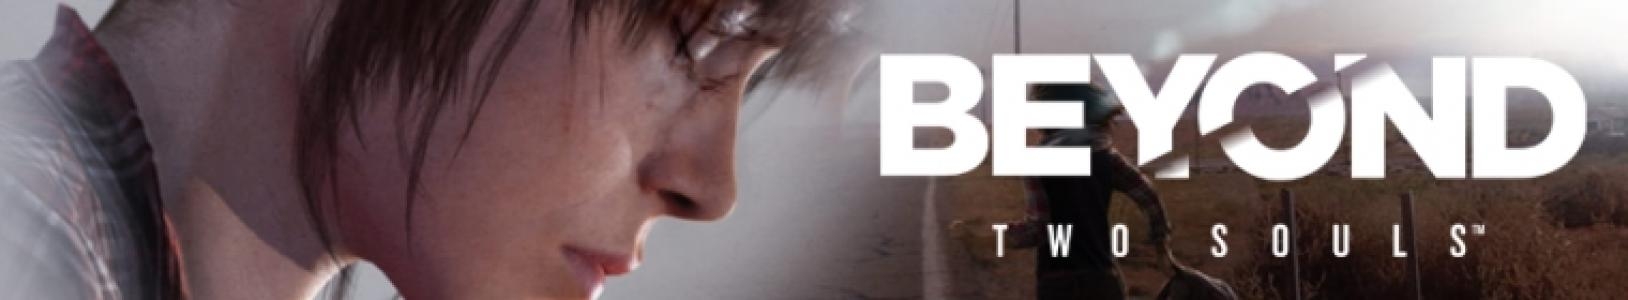 Beyond: Two Souls banner